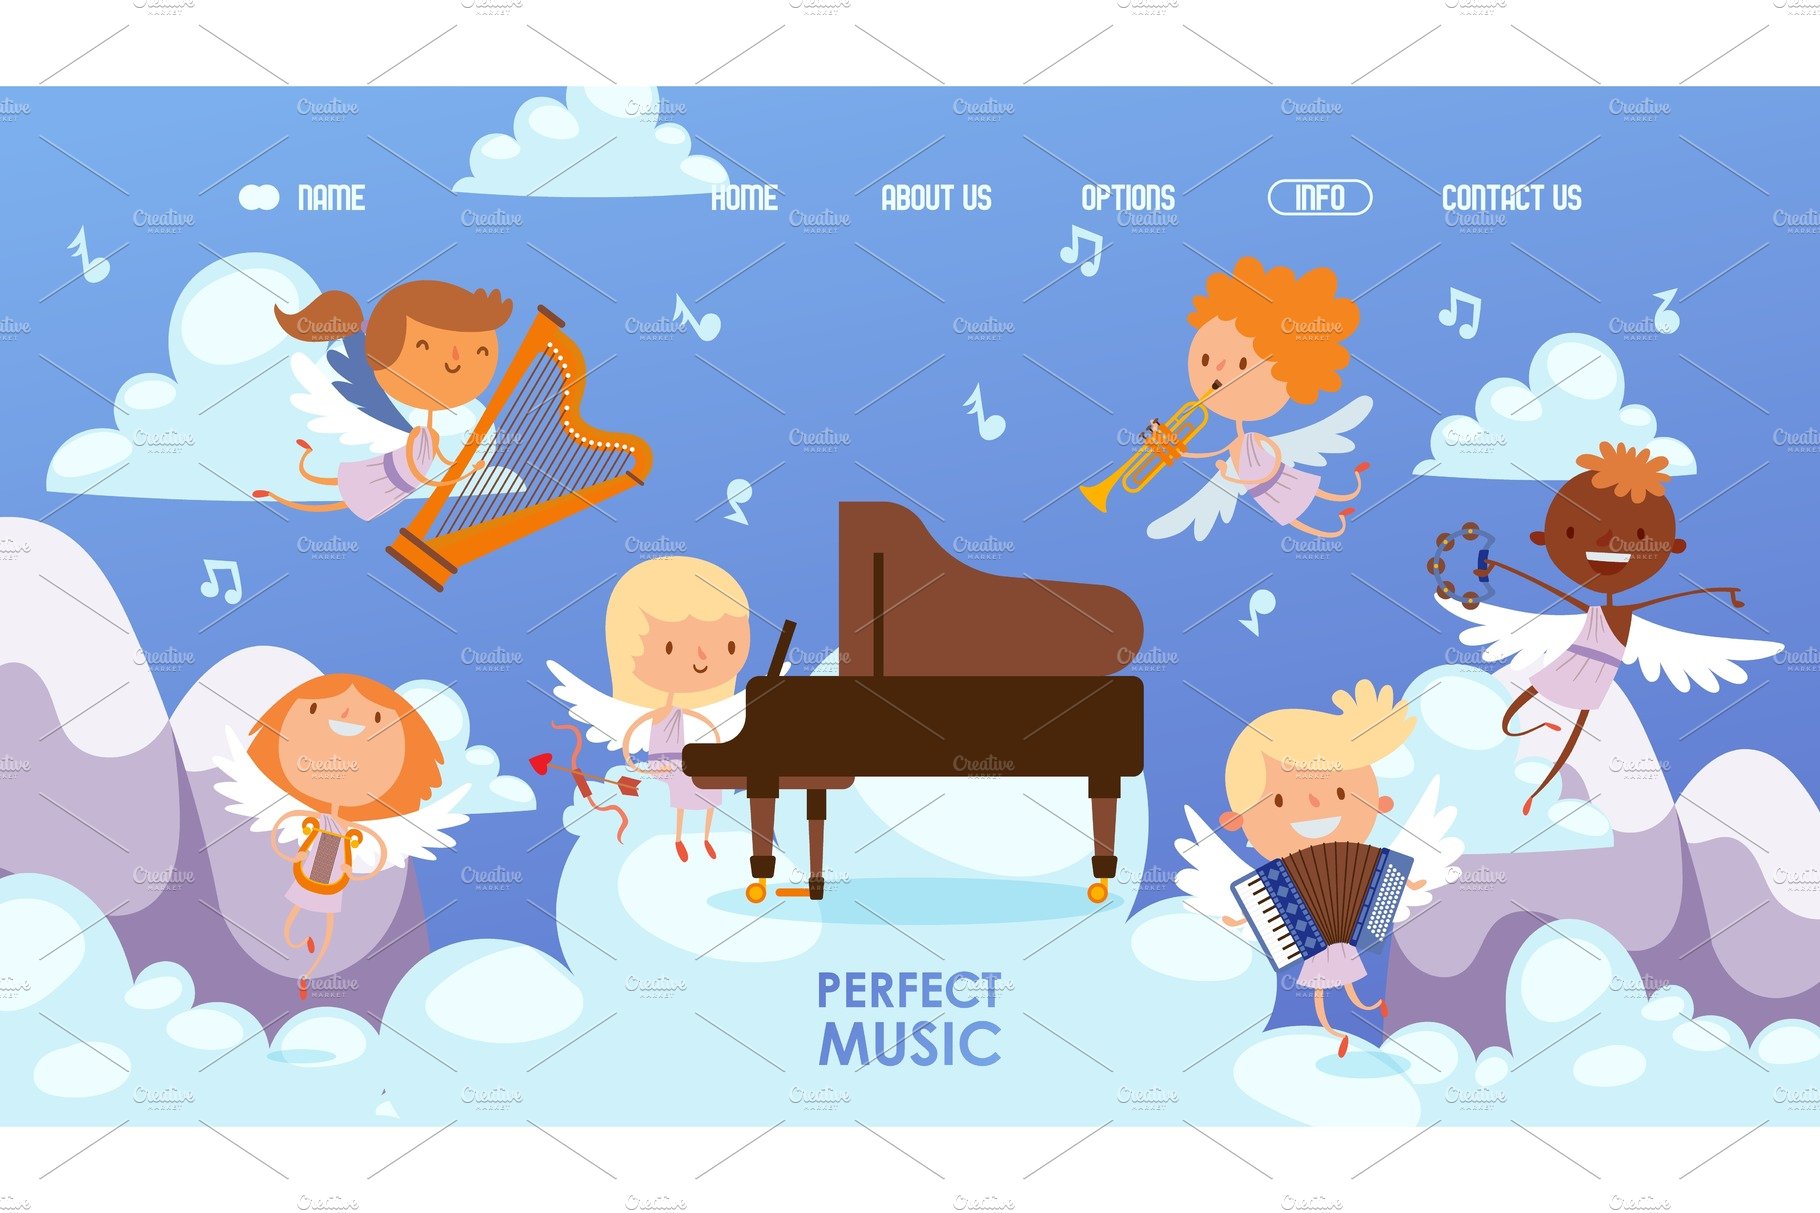 Coupidone kids play perfect music cover image.